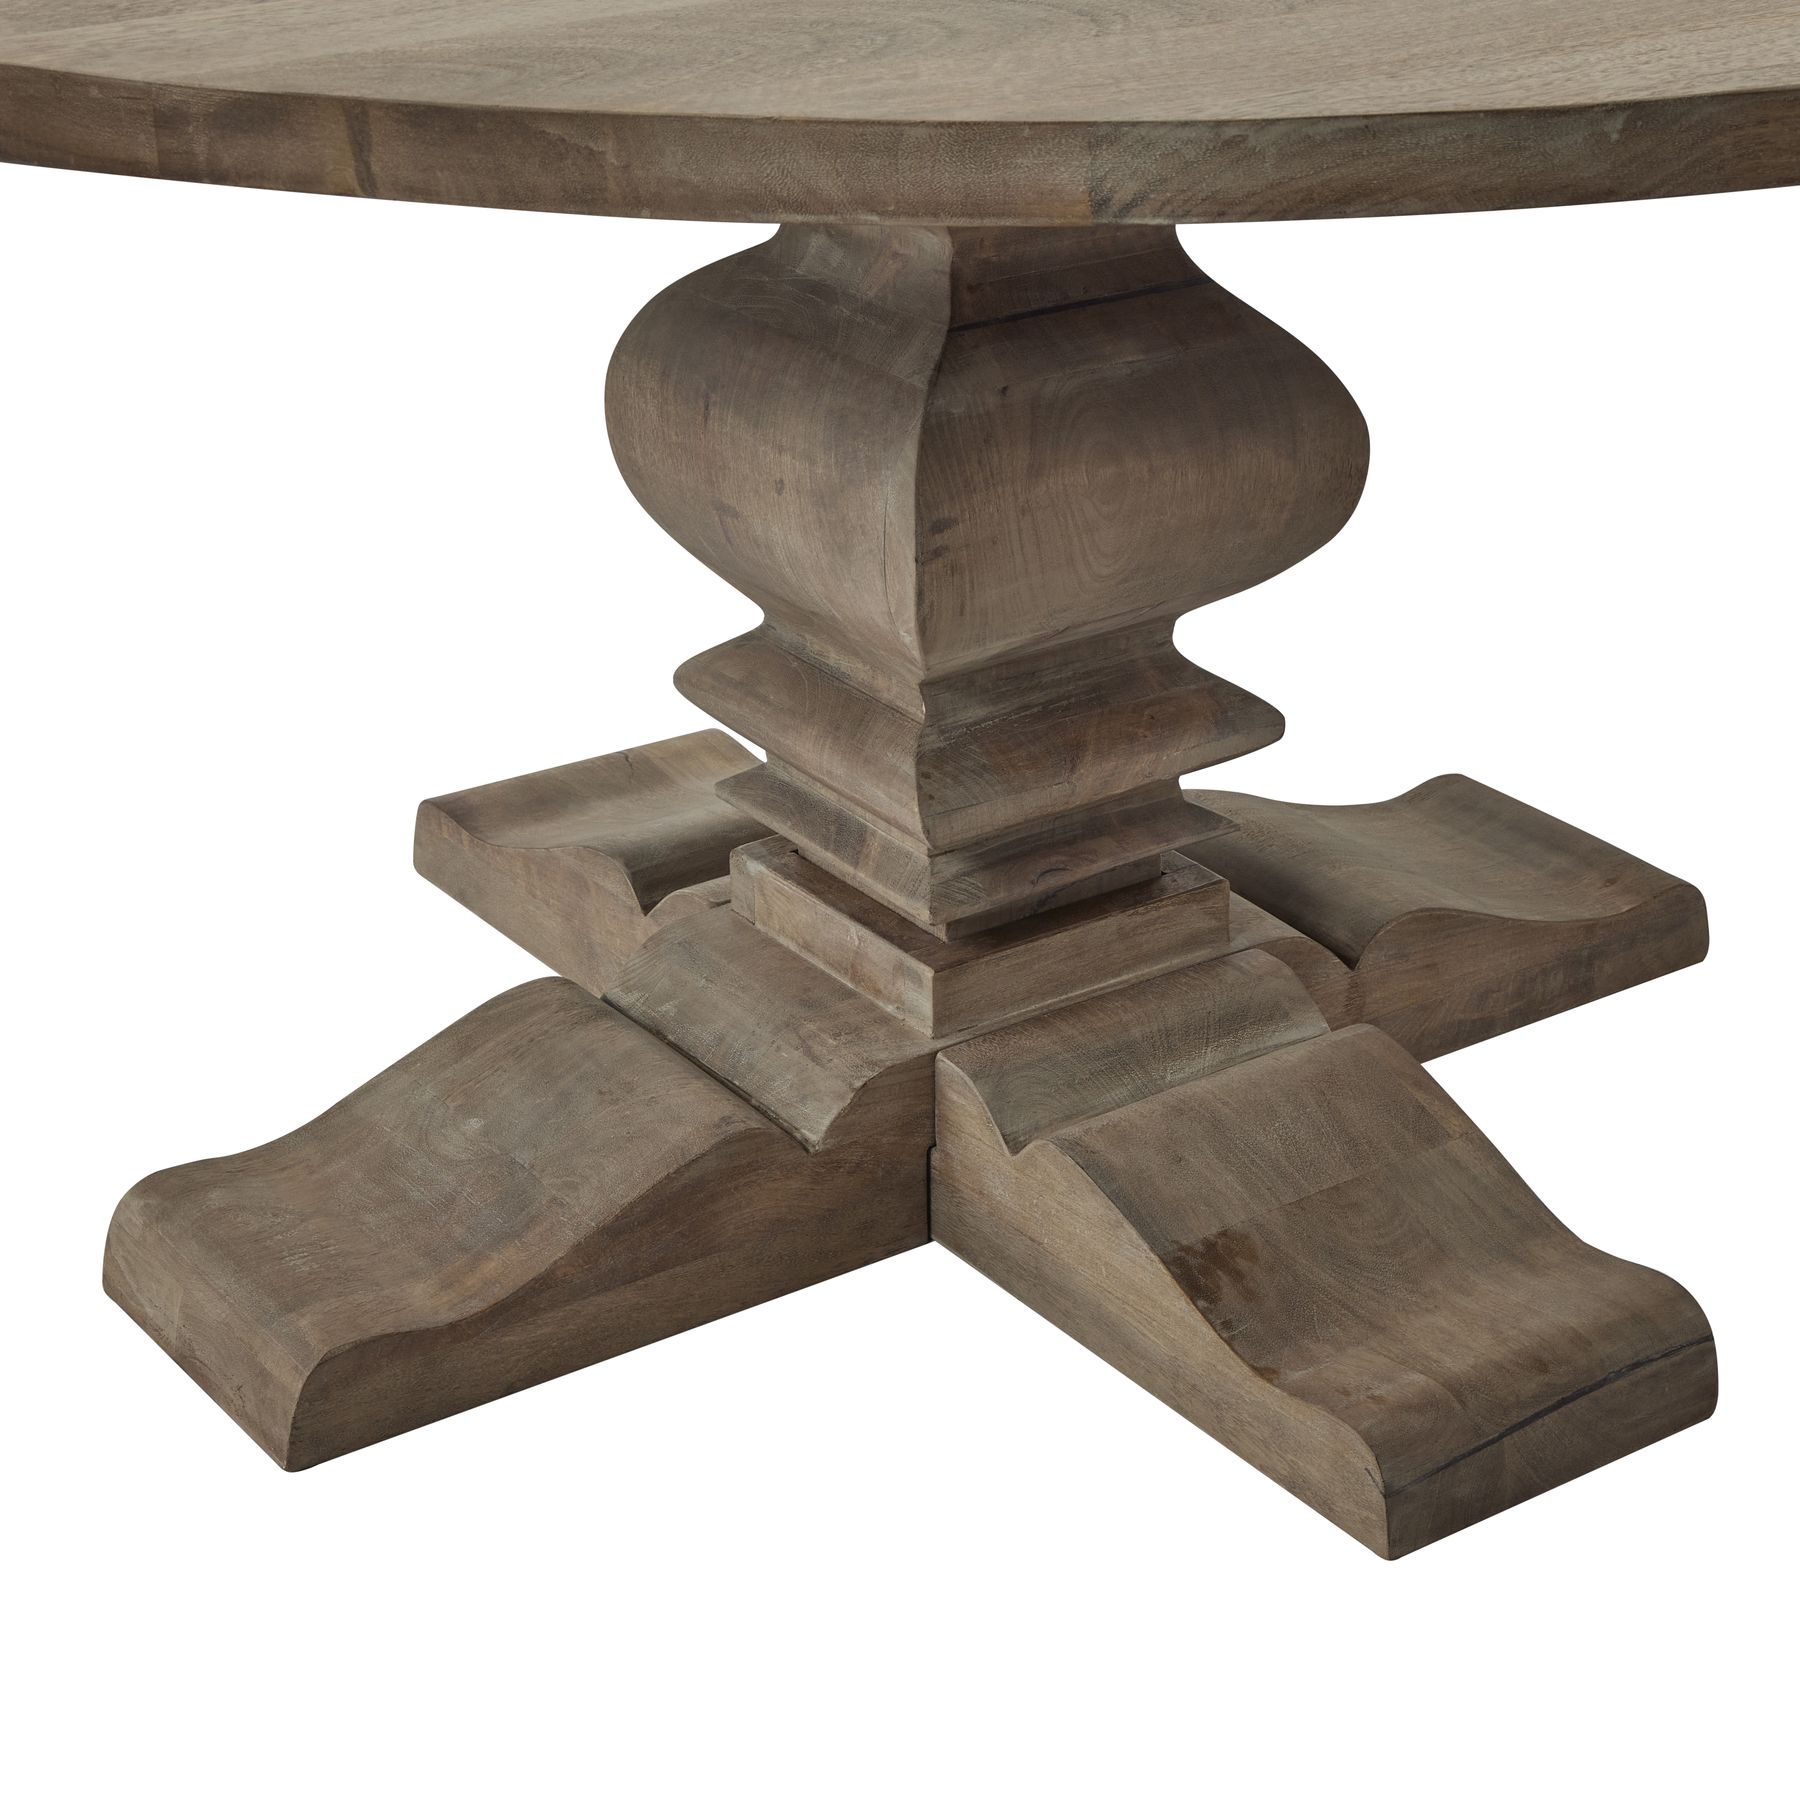 Copgrove Collection Round Pedestal Dining Table - Image 2